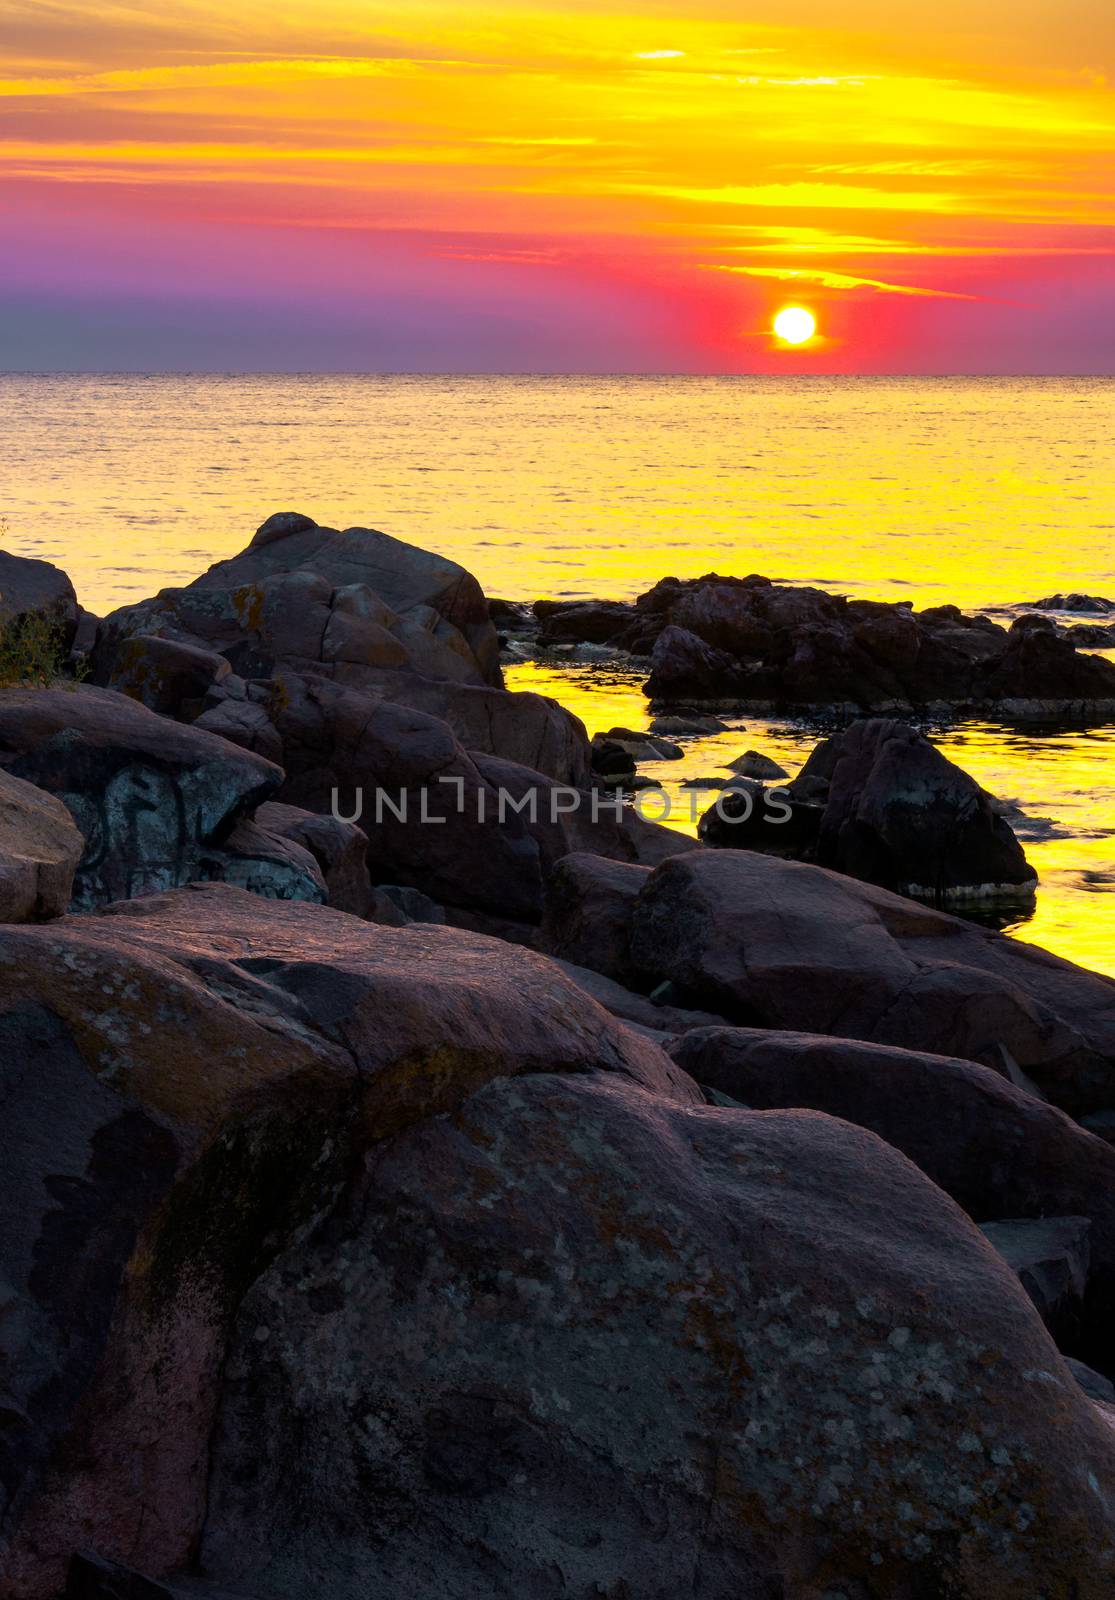 reddish sunrise over the sea with rocky shore. beautiful summer scenery and vacation concept